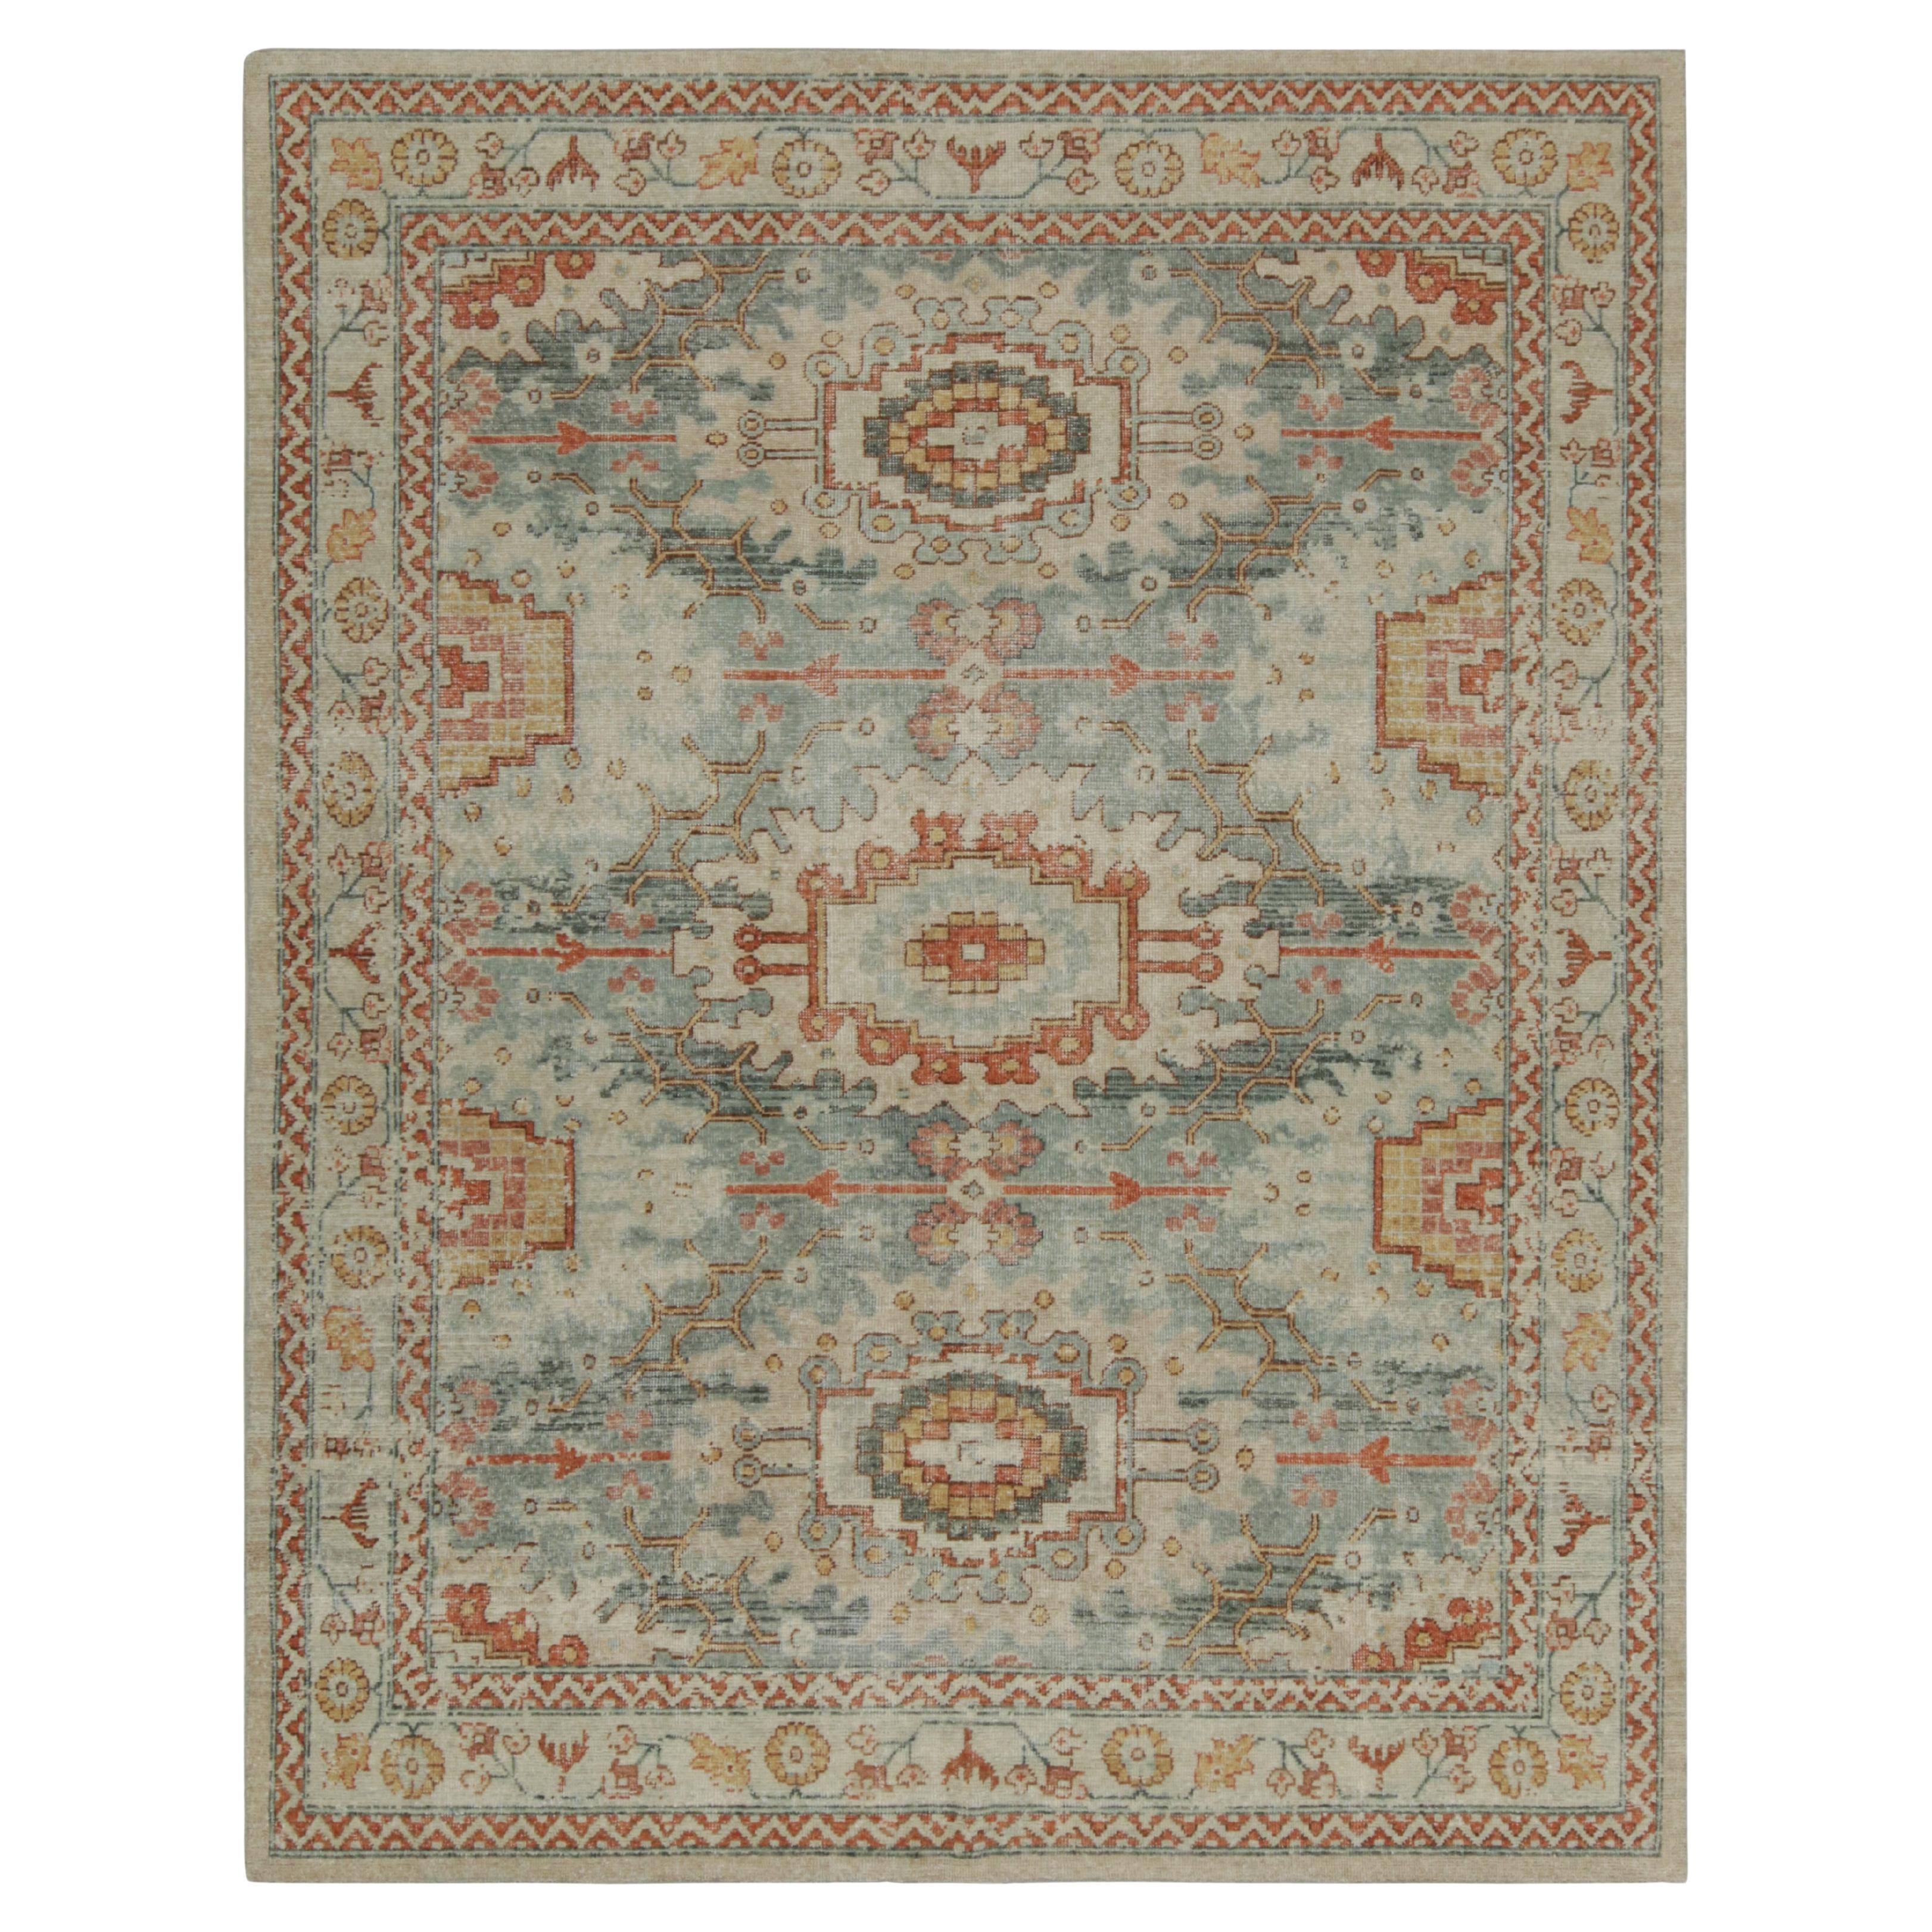 Rug & Kilim’s Distressed Tribal Style Rug in Blue with Rustic Floral Patterns For Sale